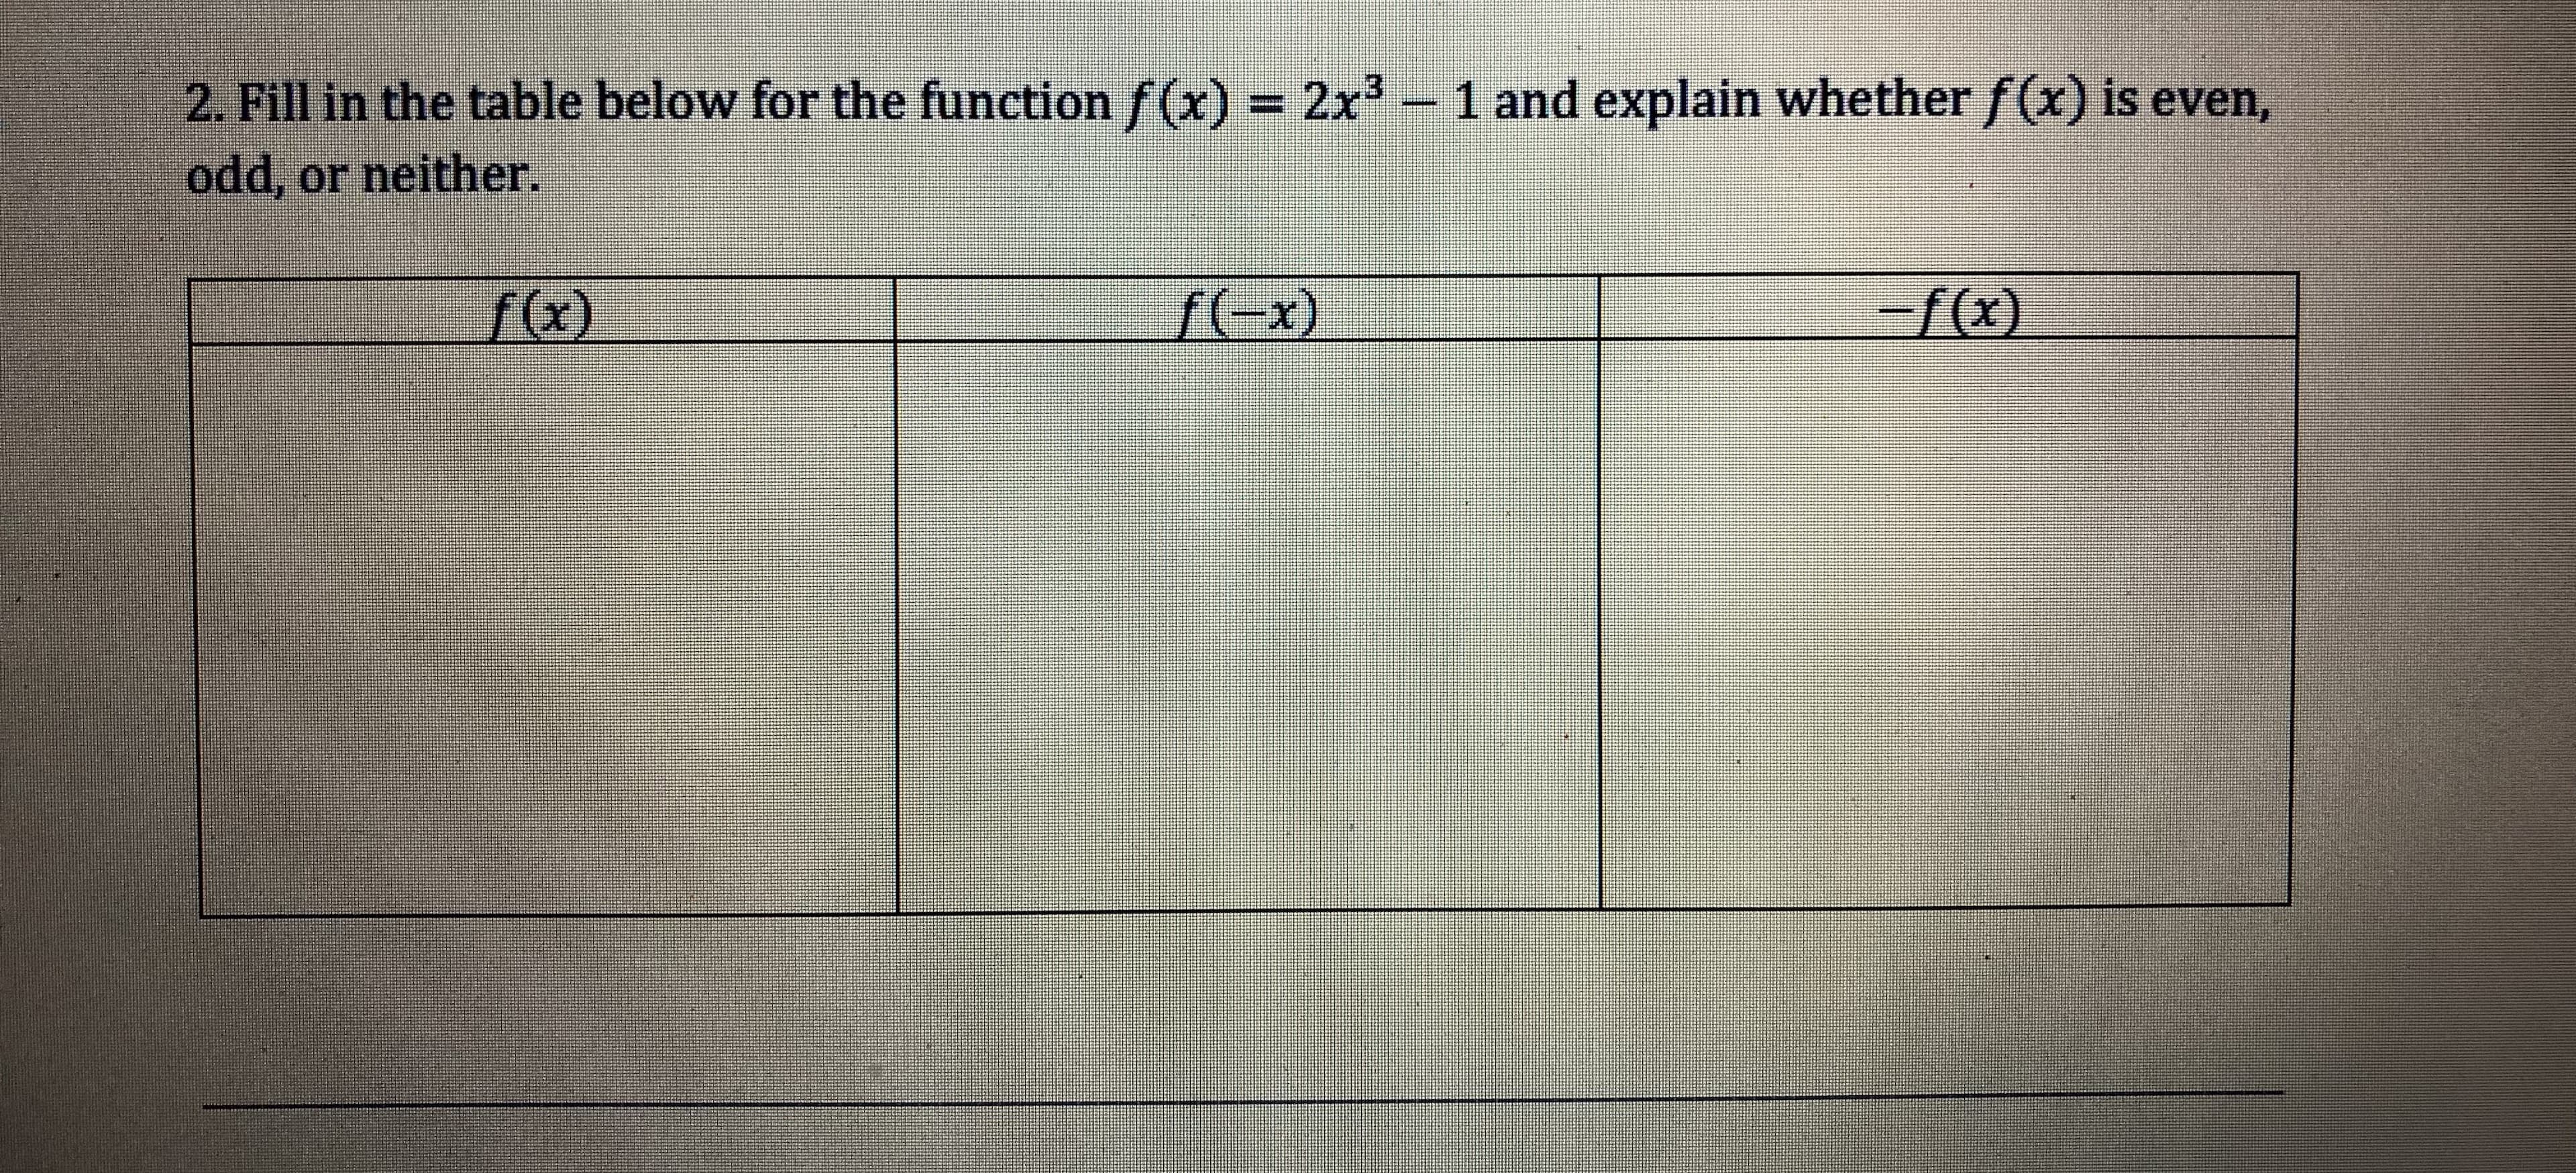 2. Fillin the table below forthe functionゾ(x)-2x3-1 and explain whether f(x) is even,
odd, or neither
